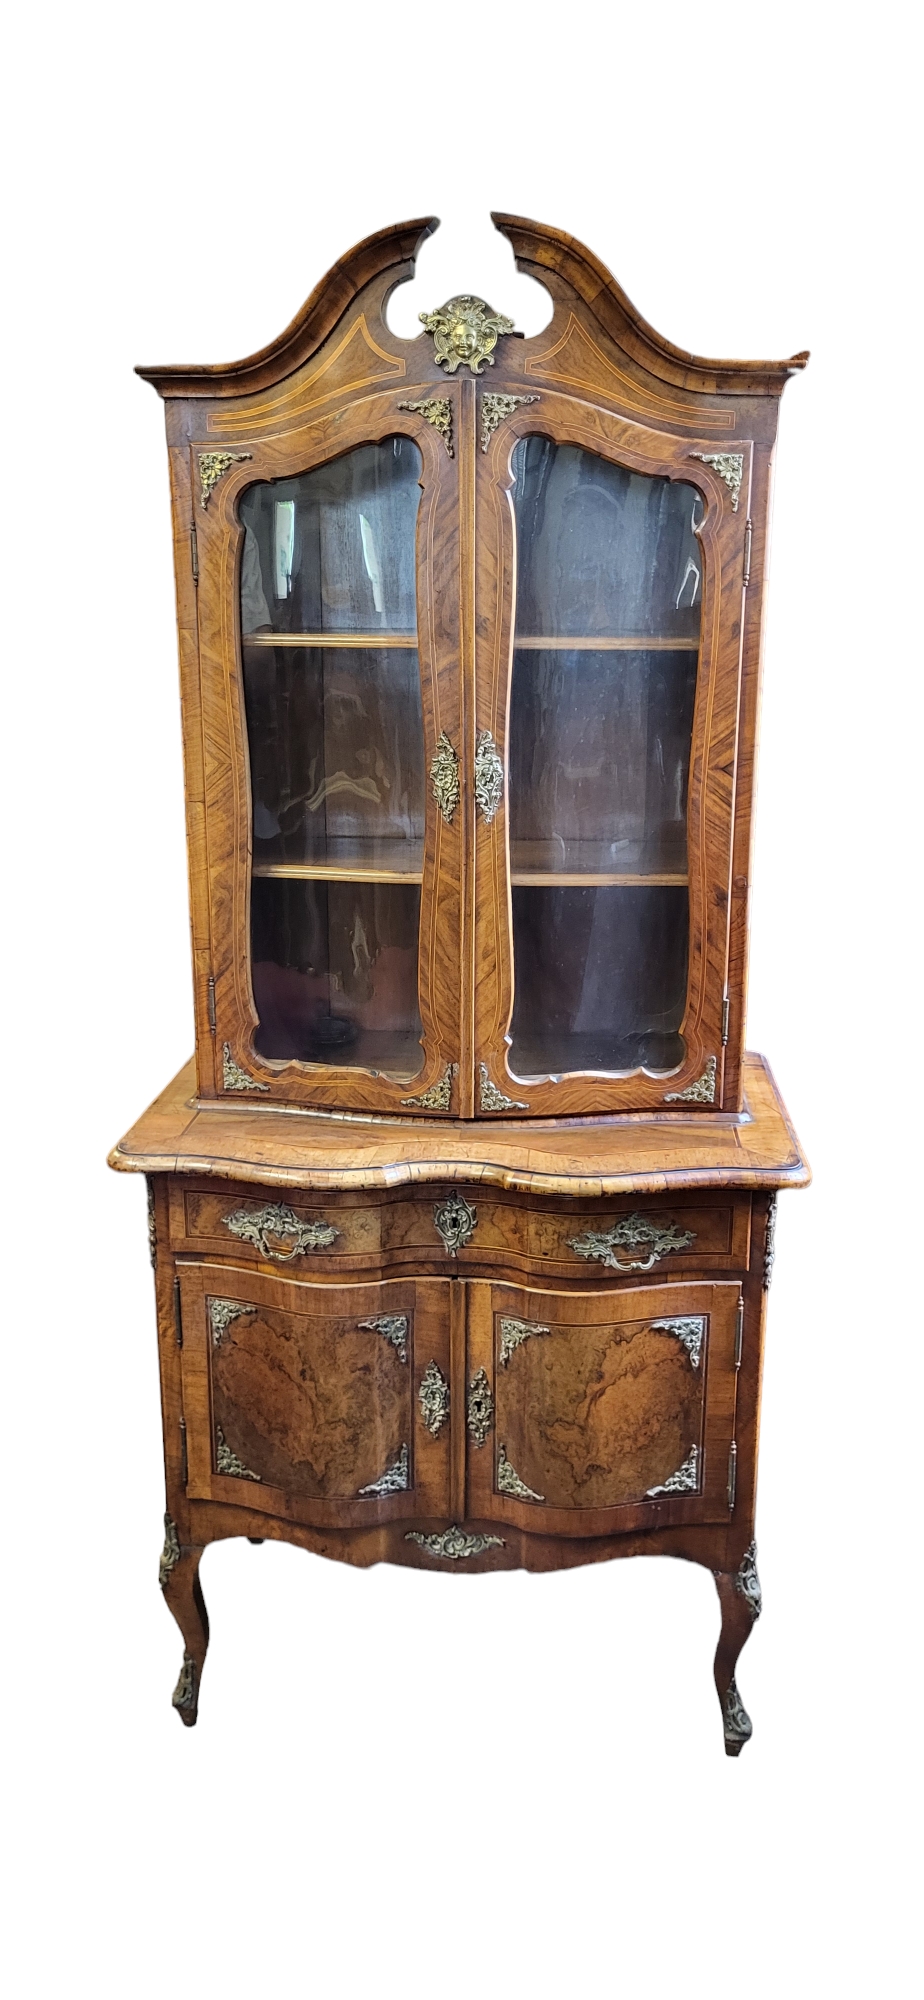 A 19TH CENTURY DUTCH FIGURED WALNUT SIDE CABINET Applied with decorative brass mounts, the swan neck